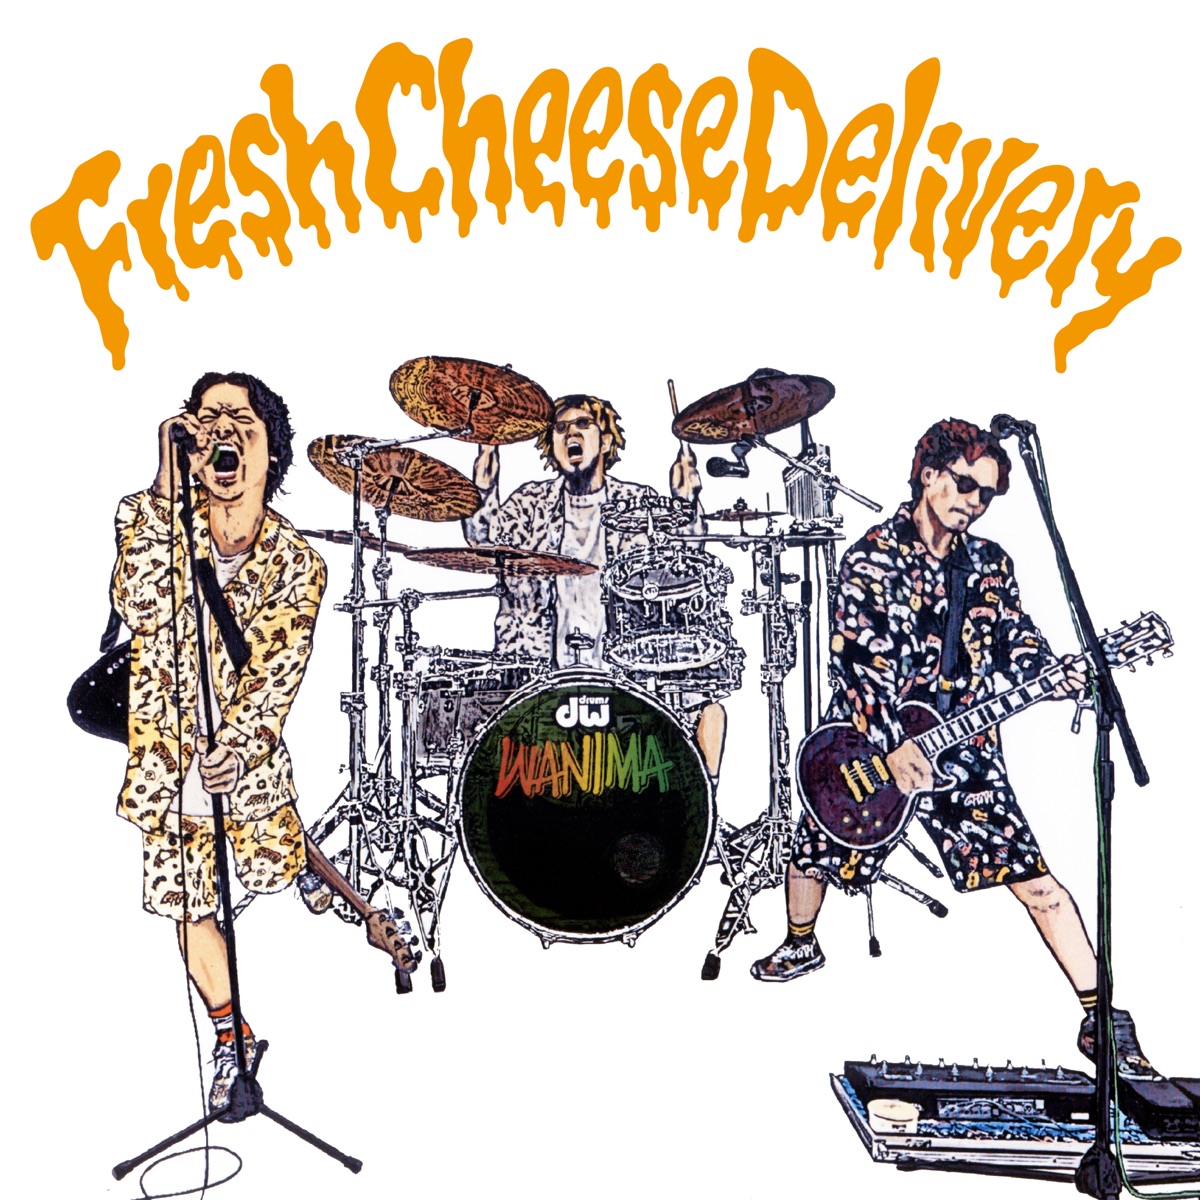 Cover art for『WANIMA - Brand New Day』from the release『Fresh Cheese Delivery』